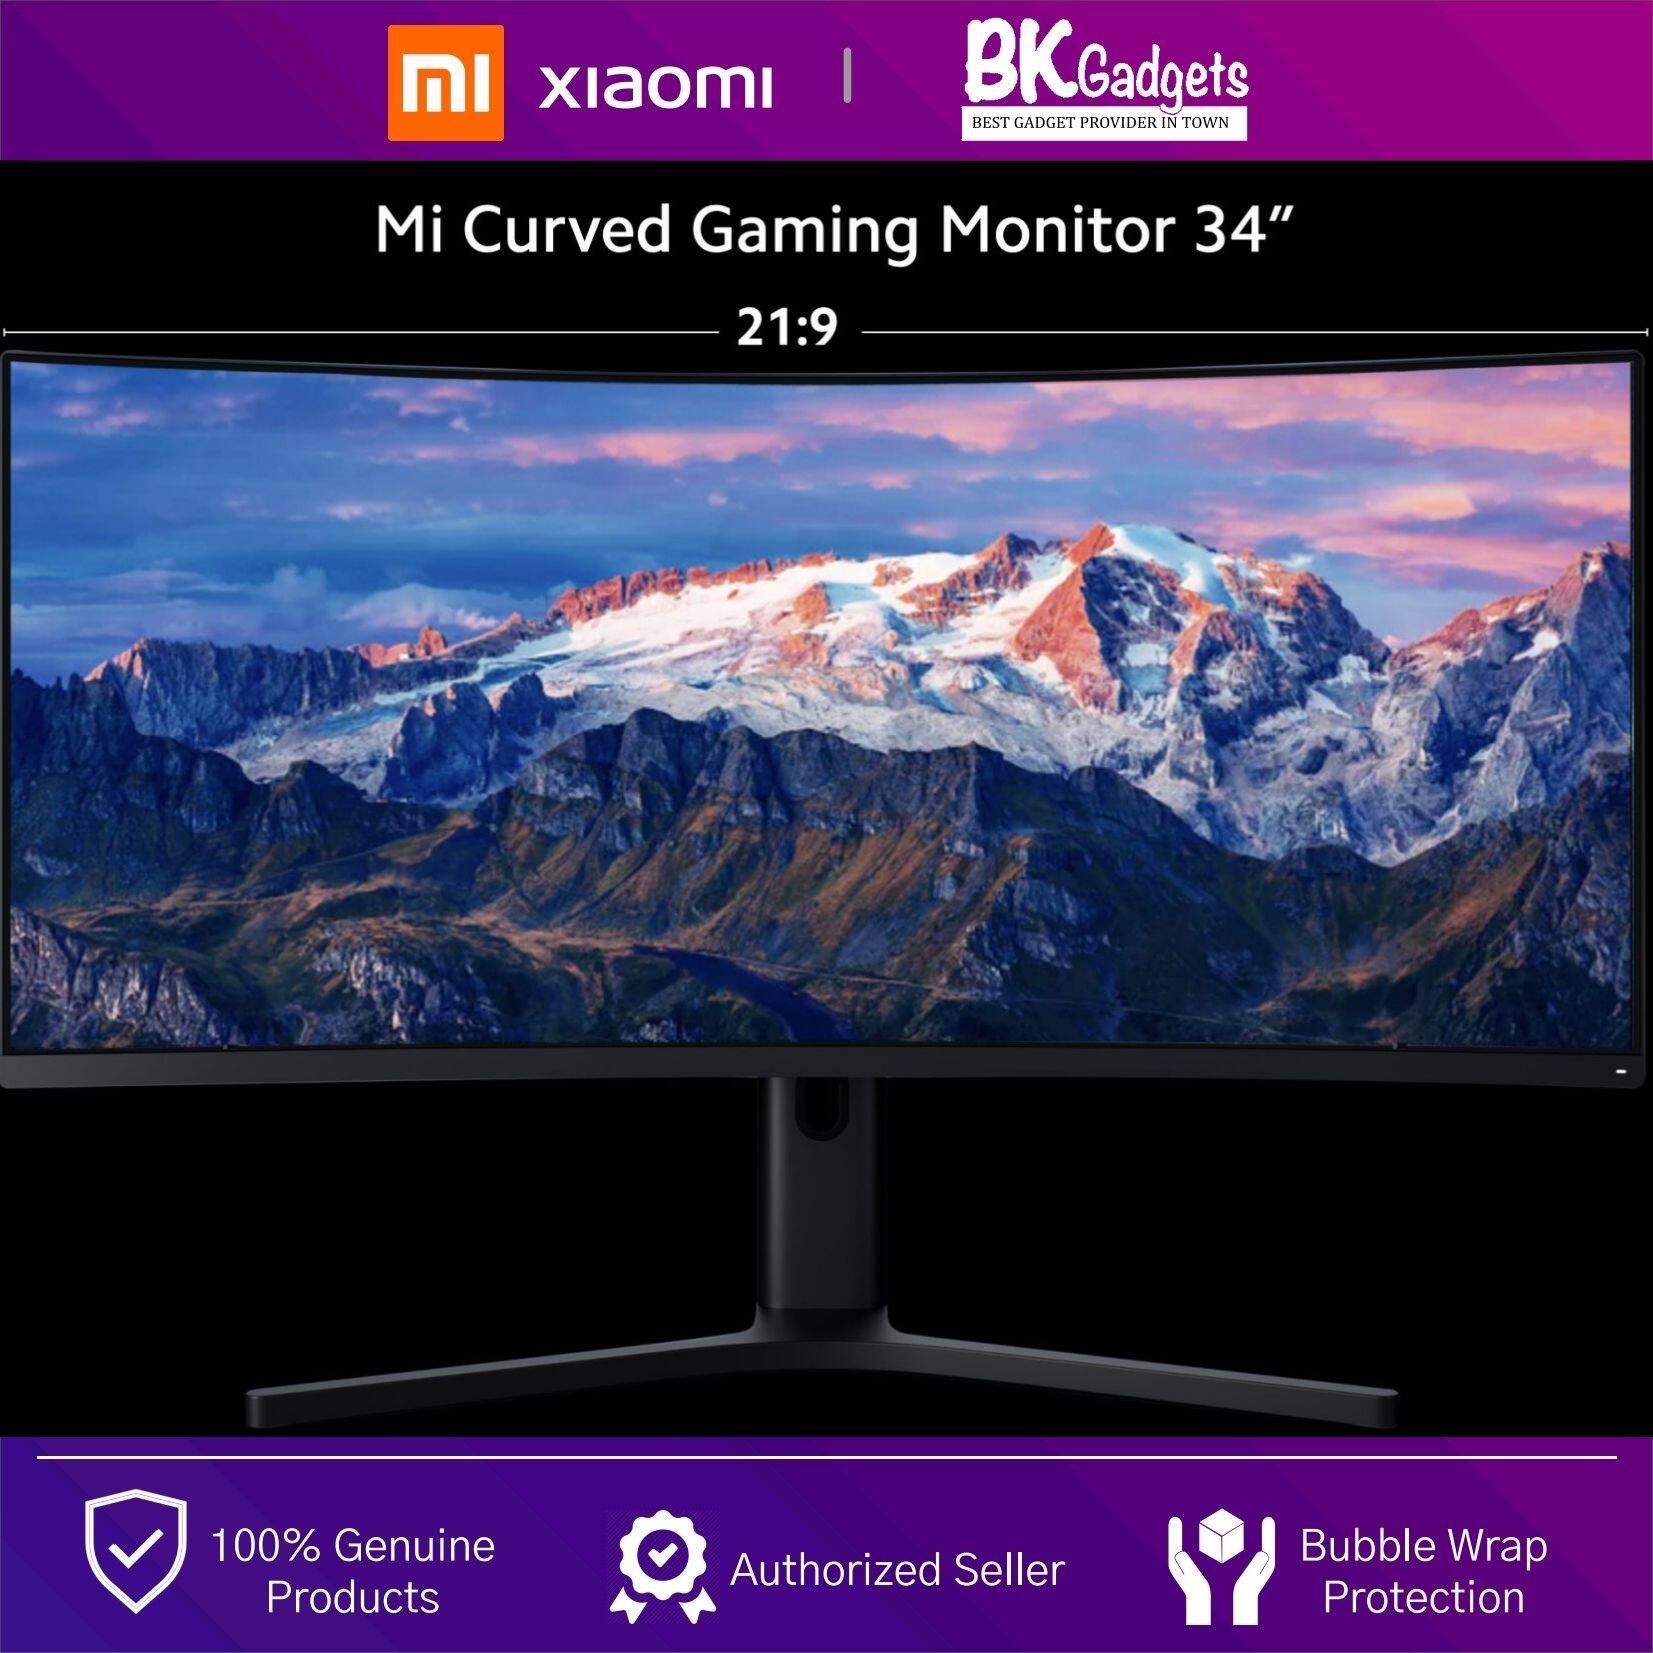 XIAOMI Mi Curved Gaming Monitor 34" - 21:9 UltraWide Panoramic View | 144Hz Refresh Rate | Easy Installation